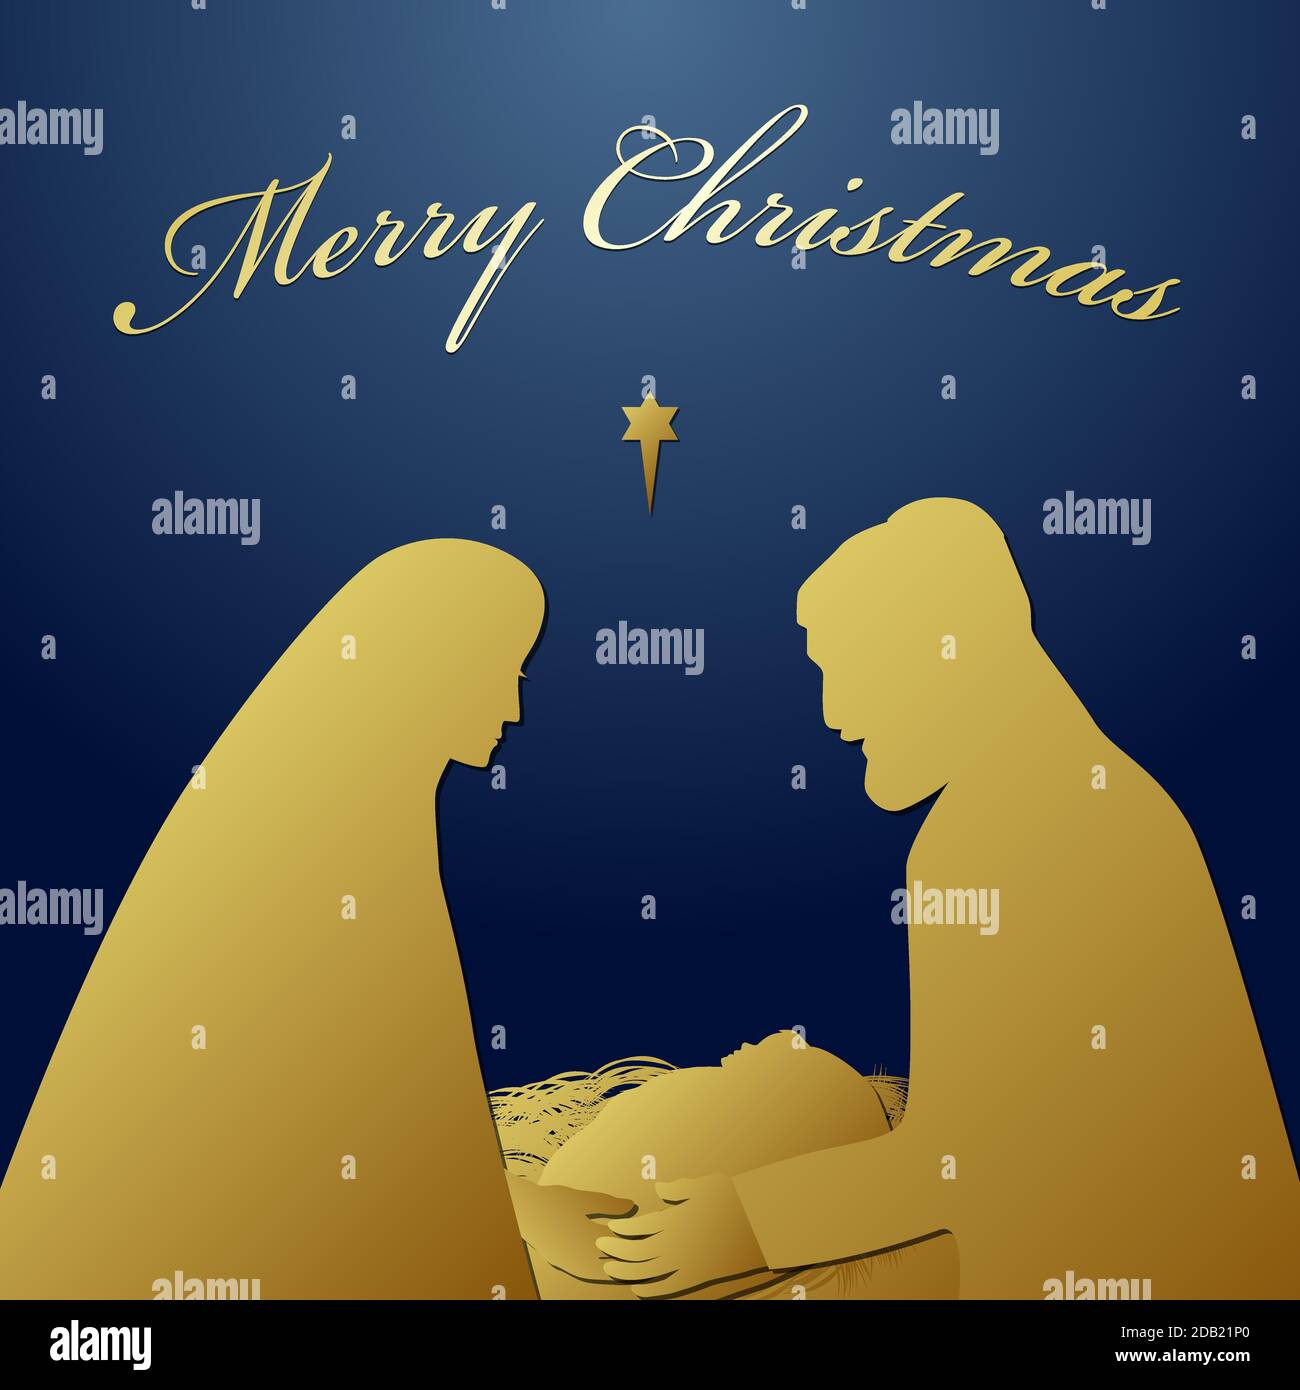 Merry Christmas Holy Night religious greetings Son of god was born spiritual biblical history. Square dark blue background silhouette couple character Stock Vector